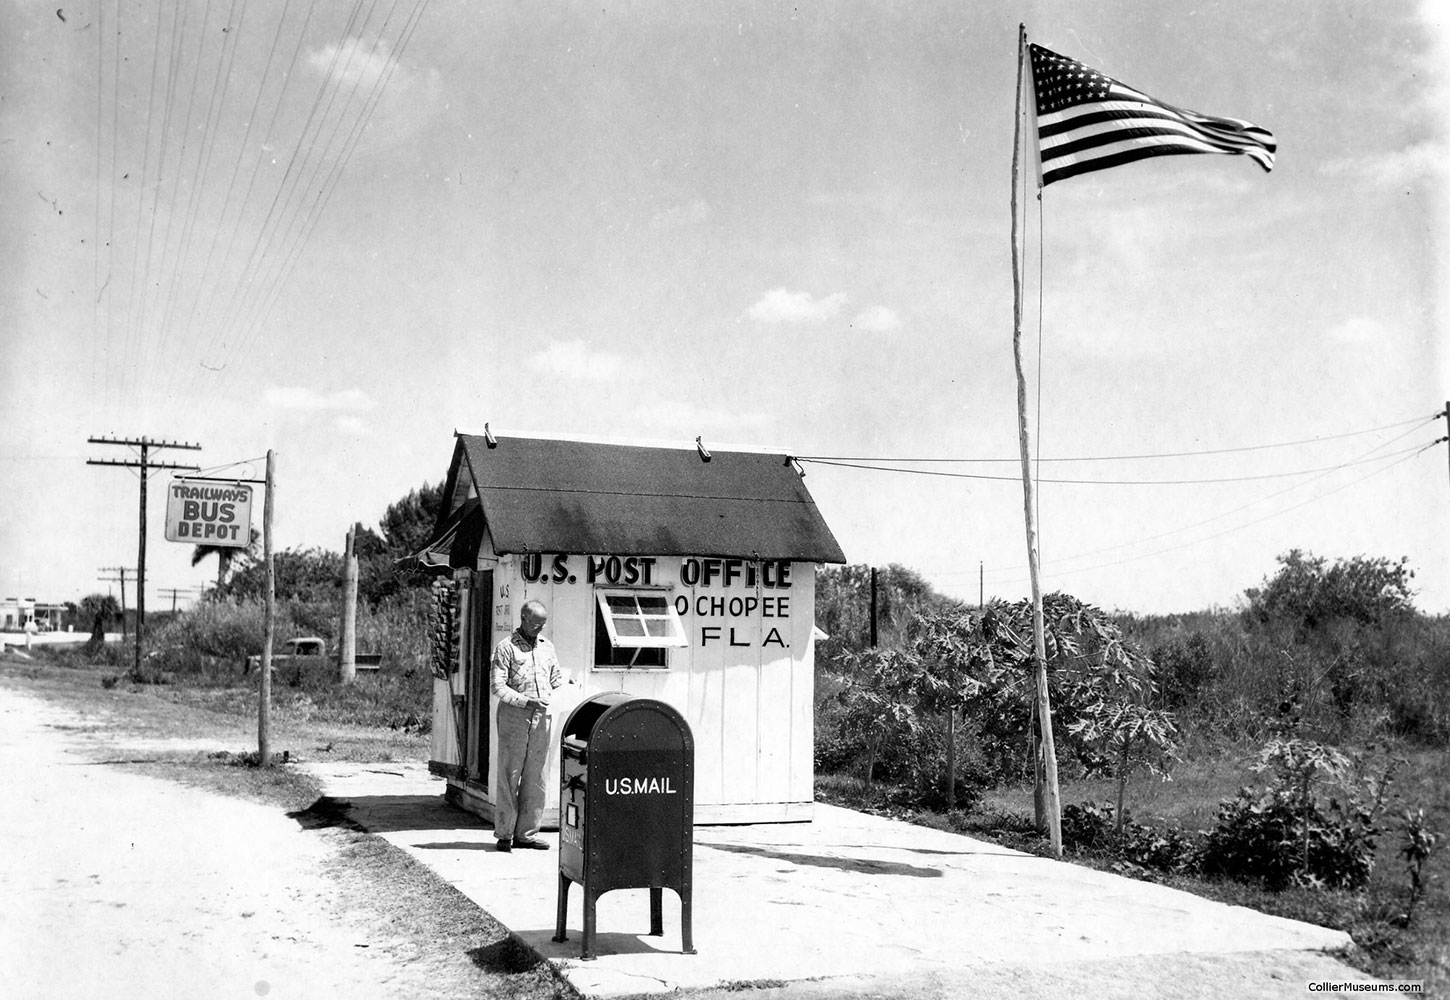 The Ochopee, Florida post office shortly after its 1953 conversion from a tomato farm shed.